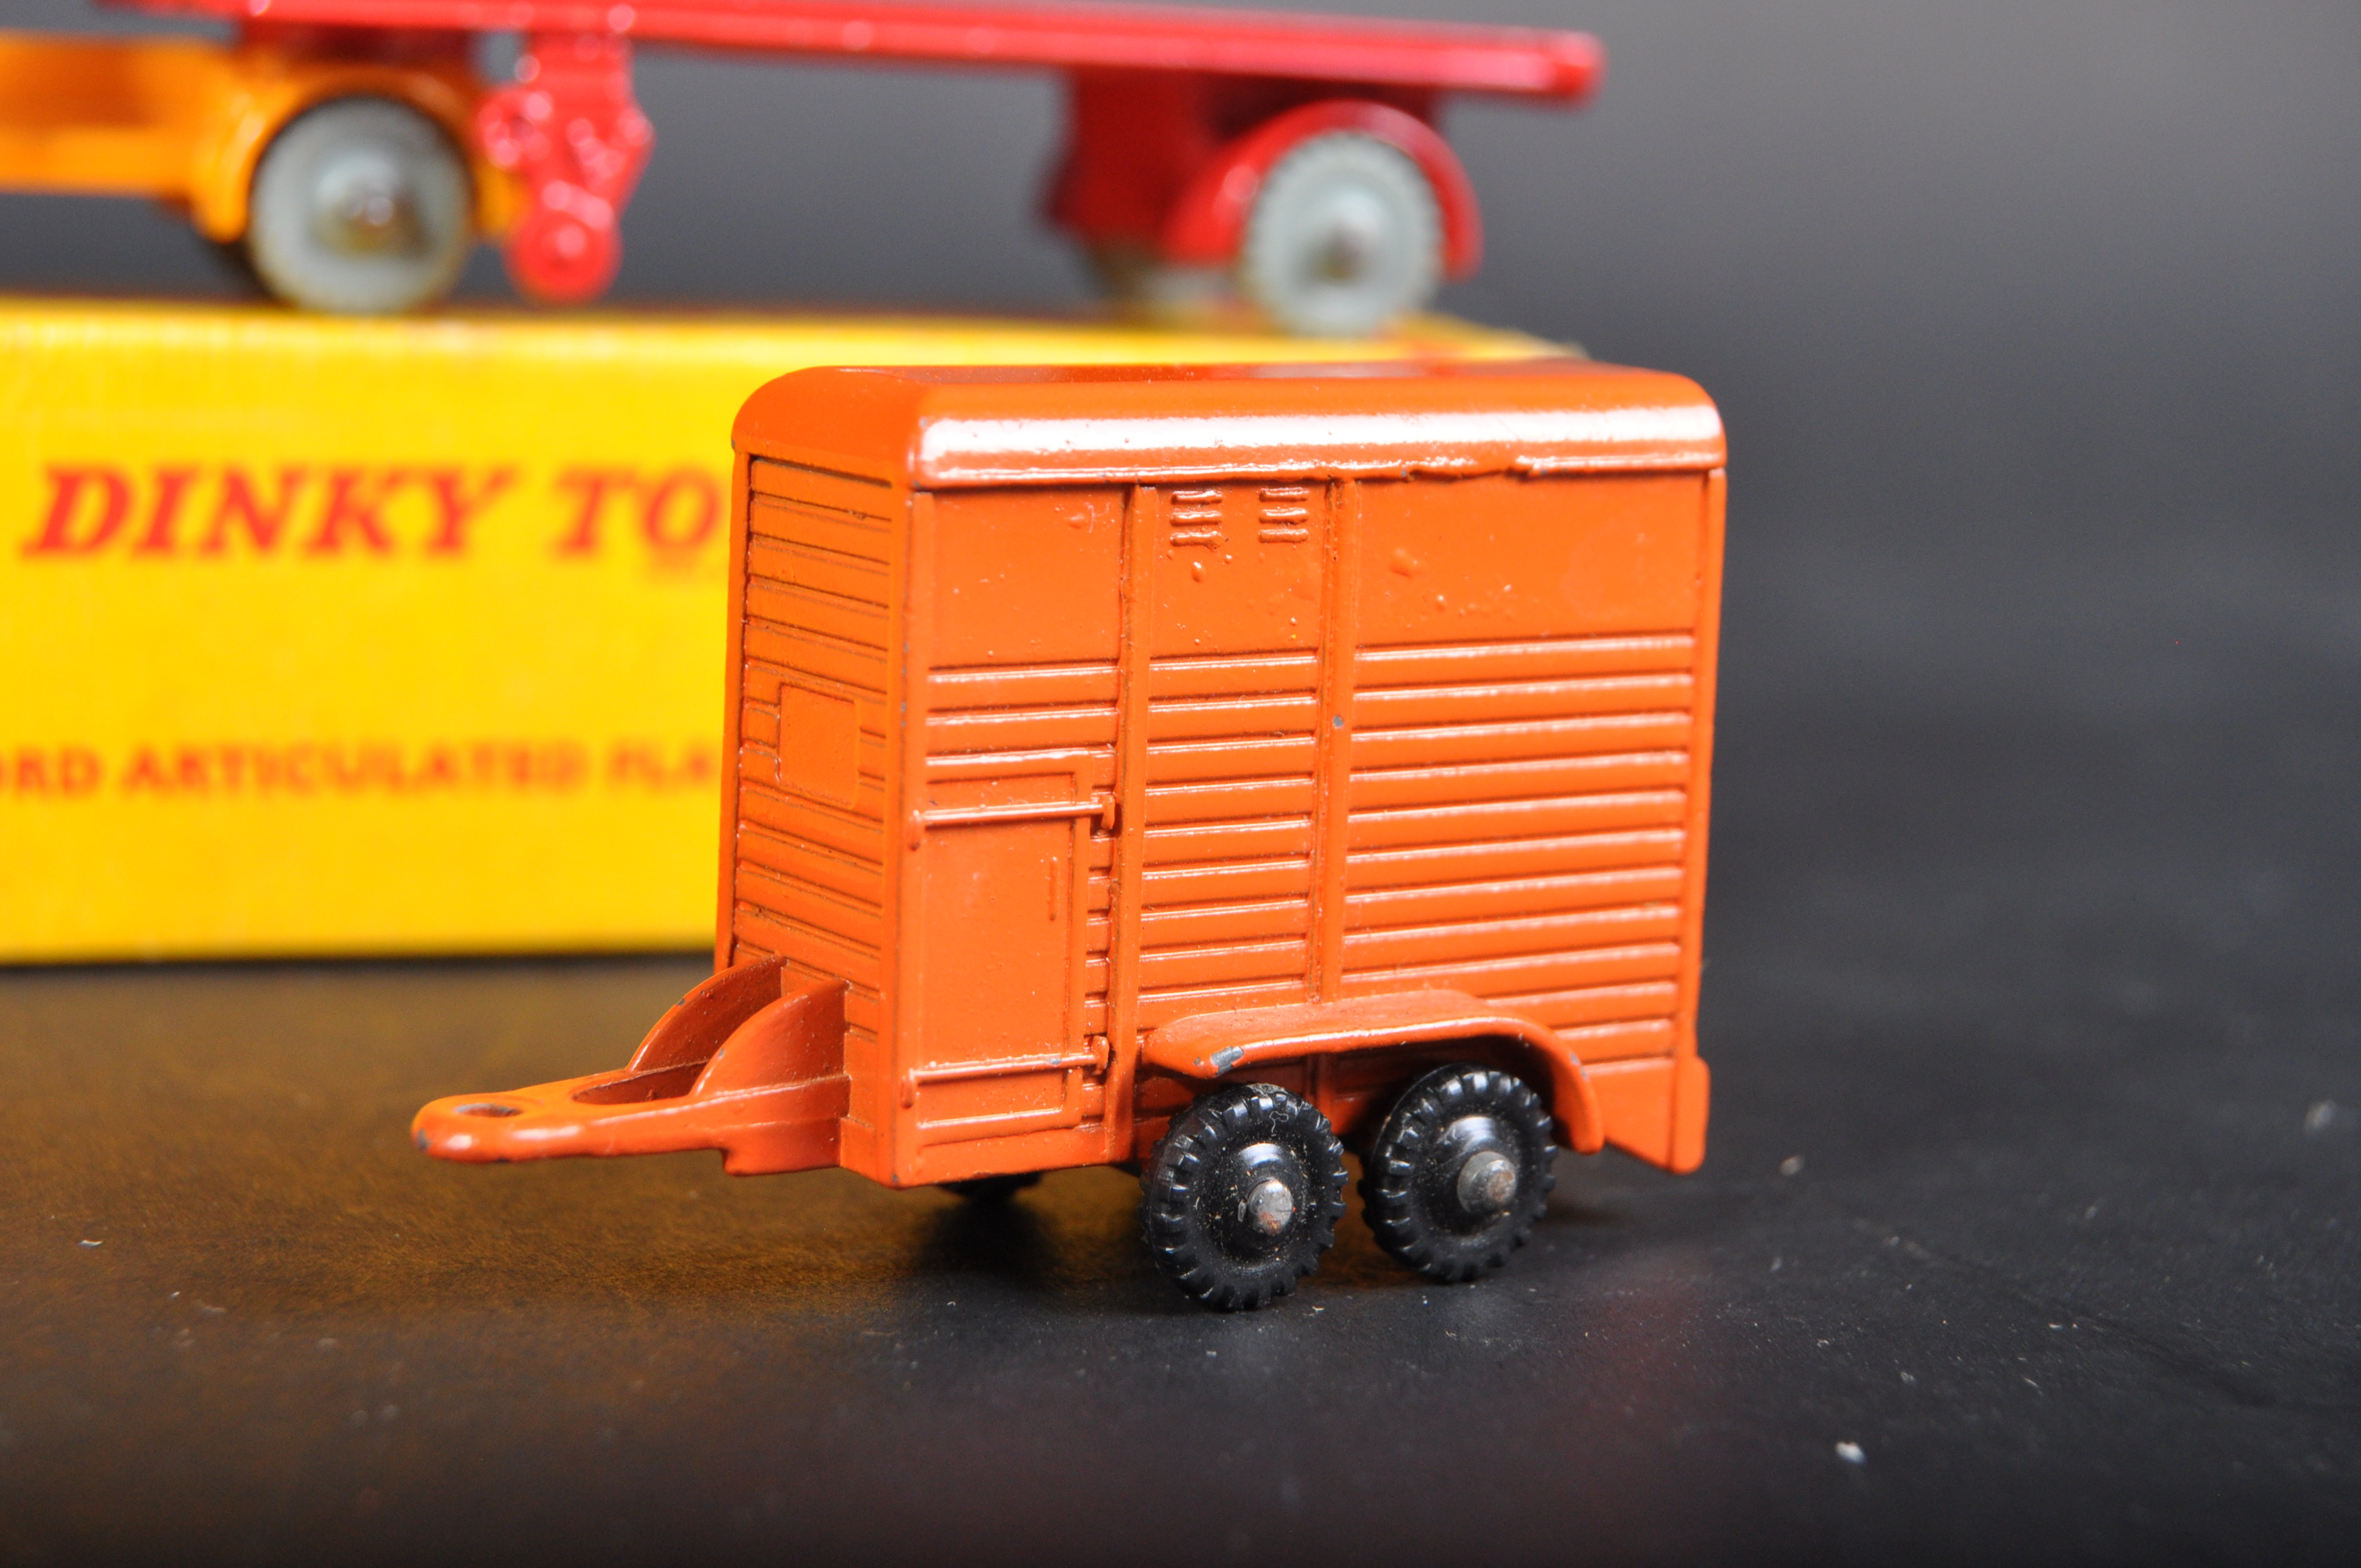 COLLECTION OF VINTAGE DUBLO DINKY TOYS DIECAST MODELS - Image 4 of 10